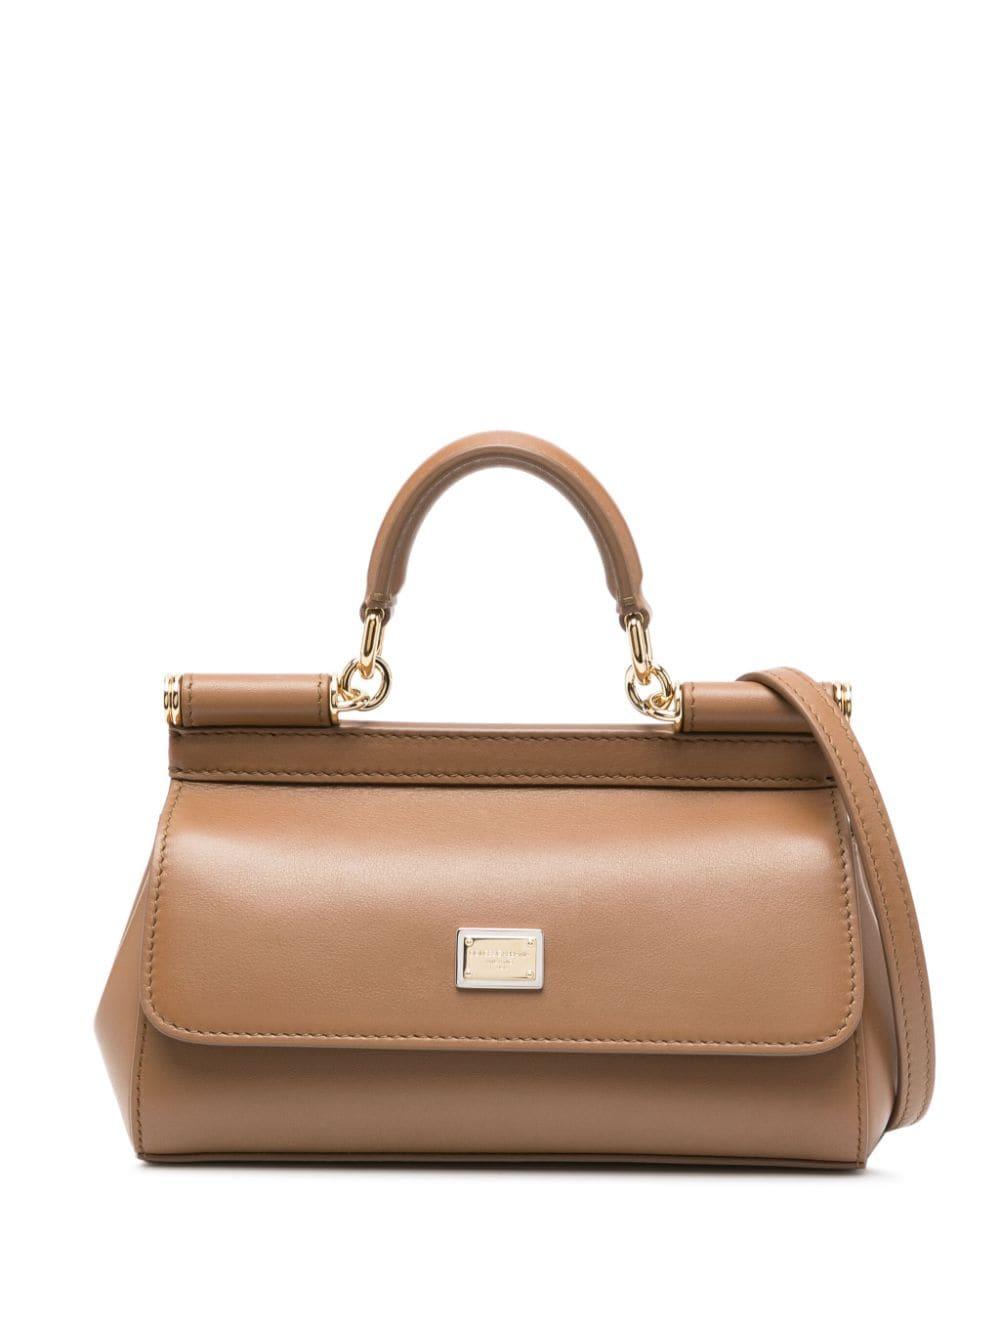 Sicily Small Leather Tote Bag in Brown - Dolce Gabbana